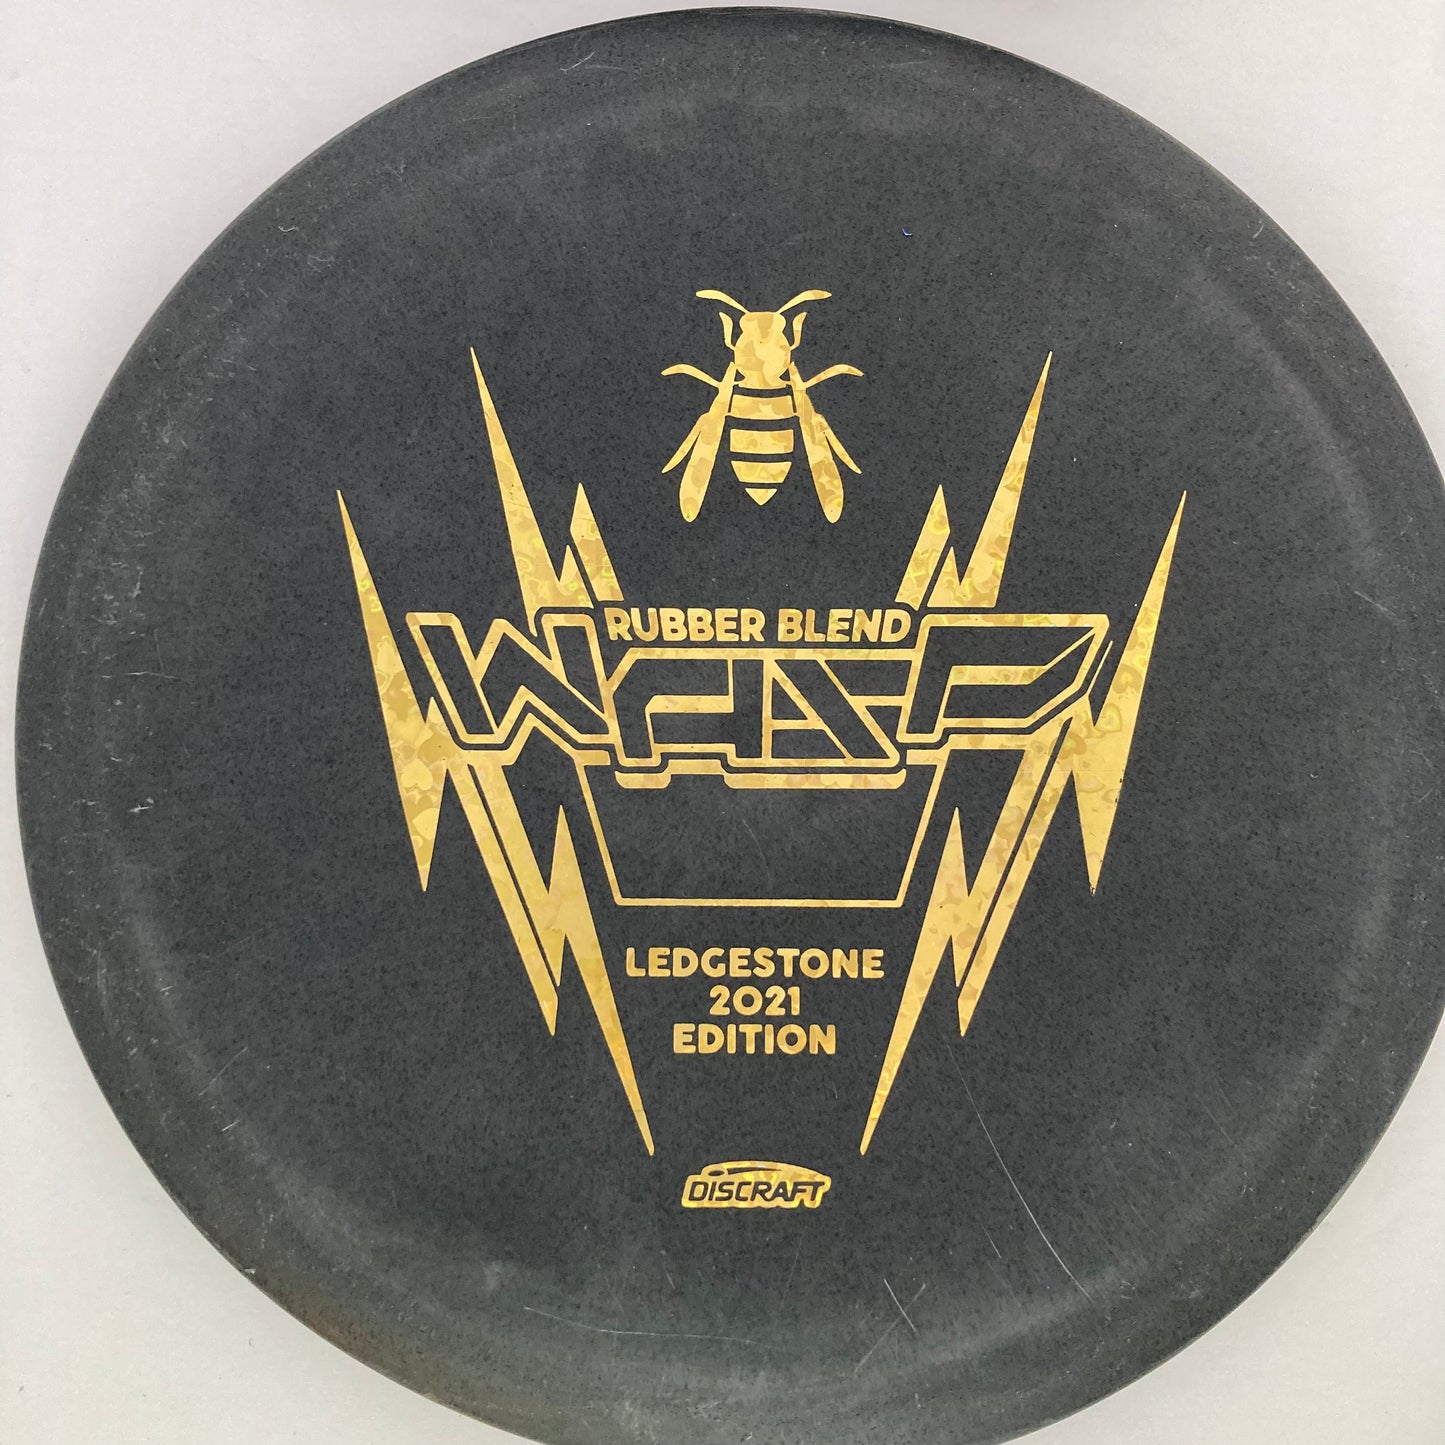 USED - Wasp